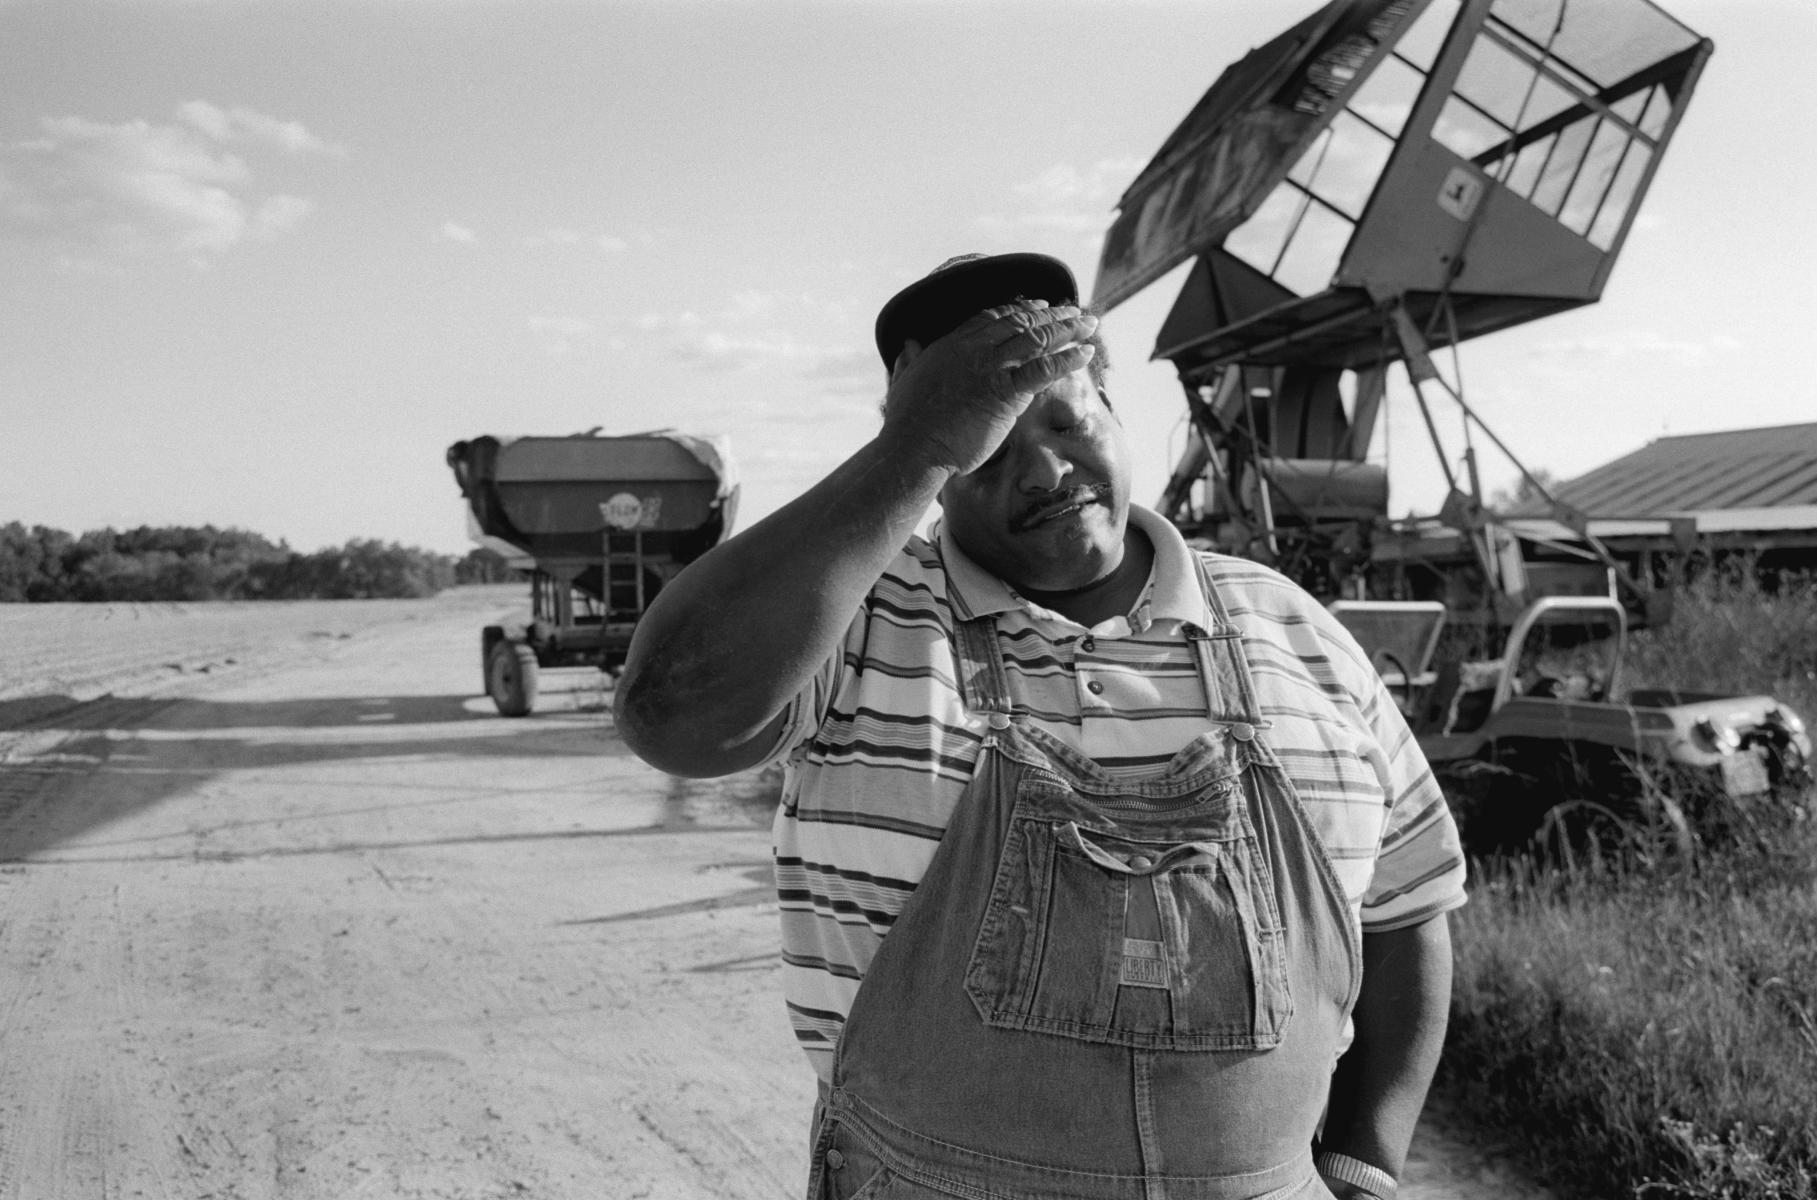 <p><center>Dooly County, Georgia:</center></p>
Carl Whitehead shows strain and frustration as the window of opportunity to plant his cotton seeds has come and gone. Having submitted his application for and operational loan on time and required before planting season, he can only wait, even as other farmers who requested the same loans at the same time have already received their money purchased and planted their seeds weeks ago. He filed for bankruptcy and will be the last generation in his family to farm. : Images : AMERICAN BLACK FARMERS PROJECT - John Ficara